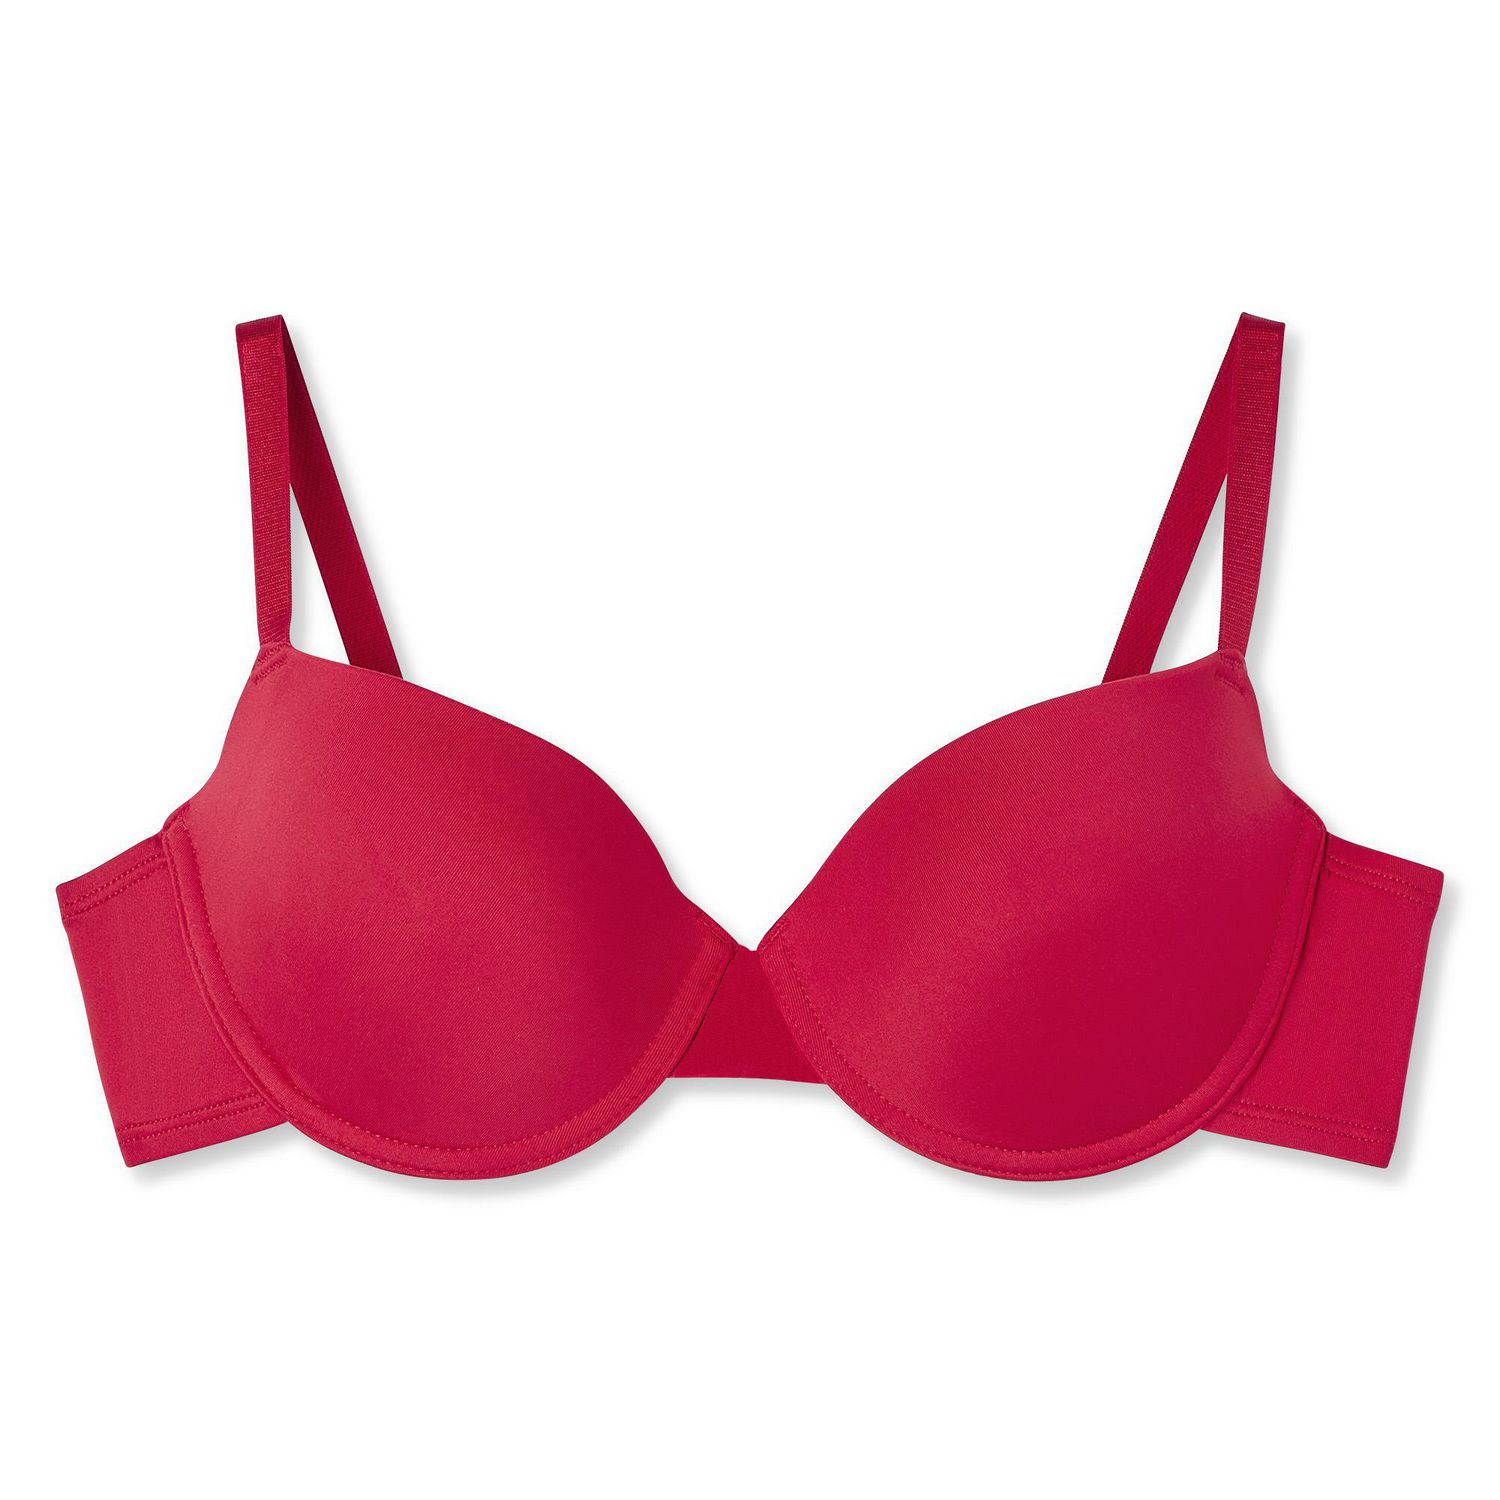 Buy Bebe women 2 pieces pushup bra red and brown Online